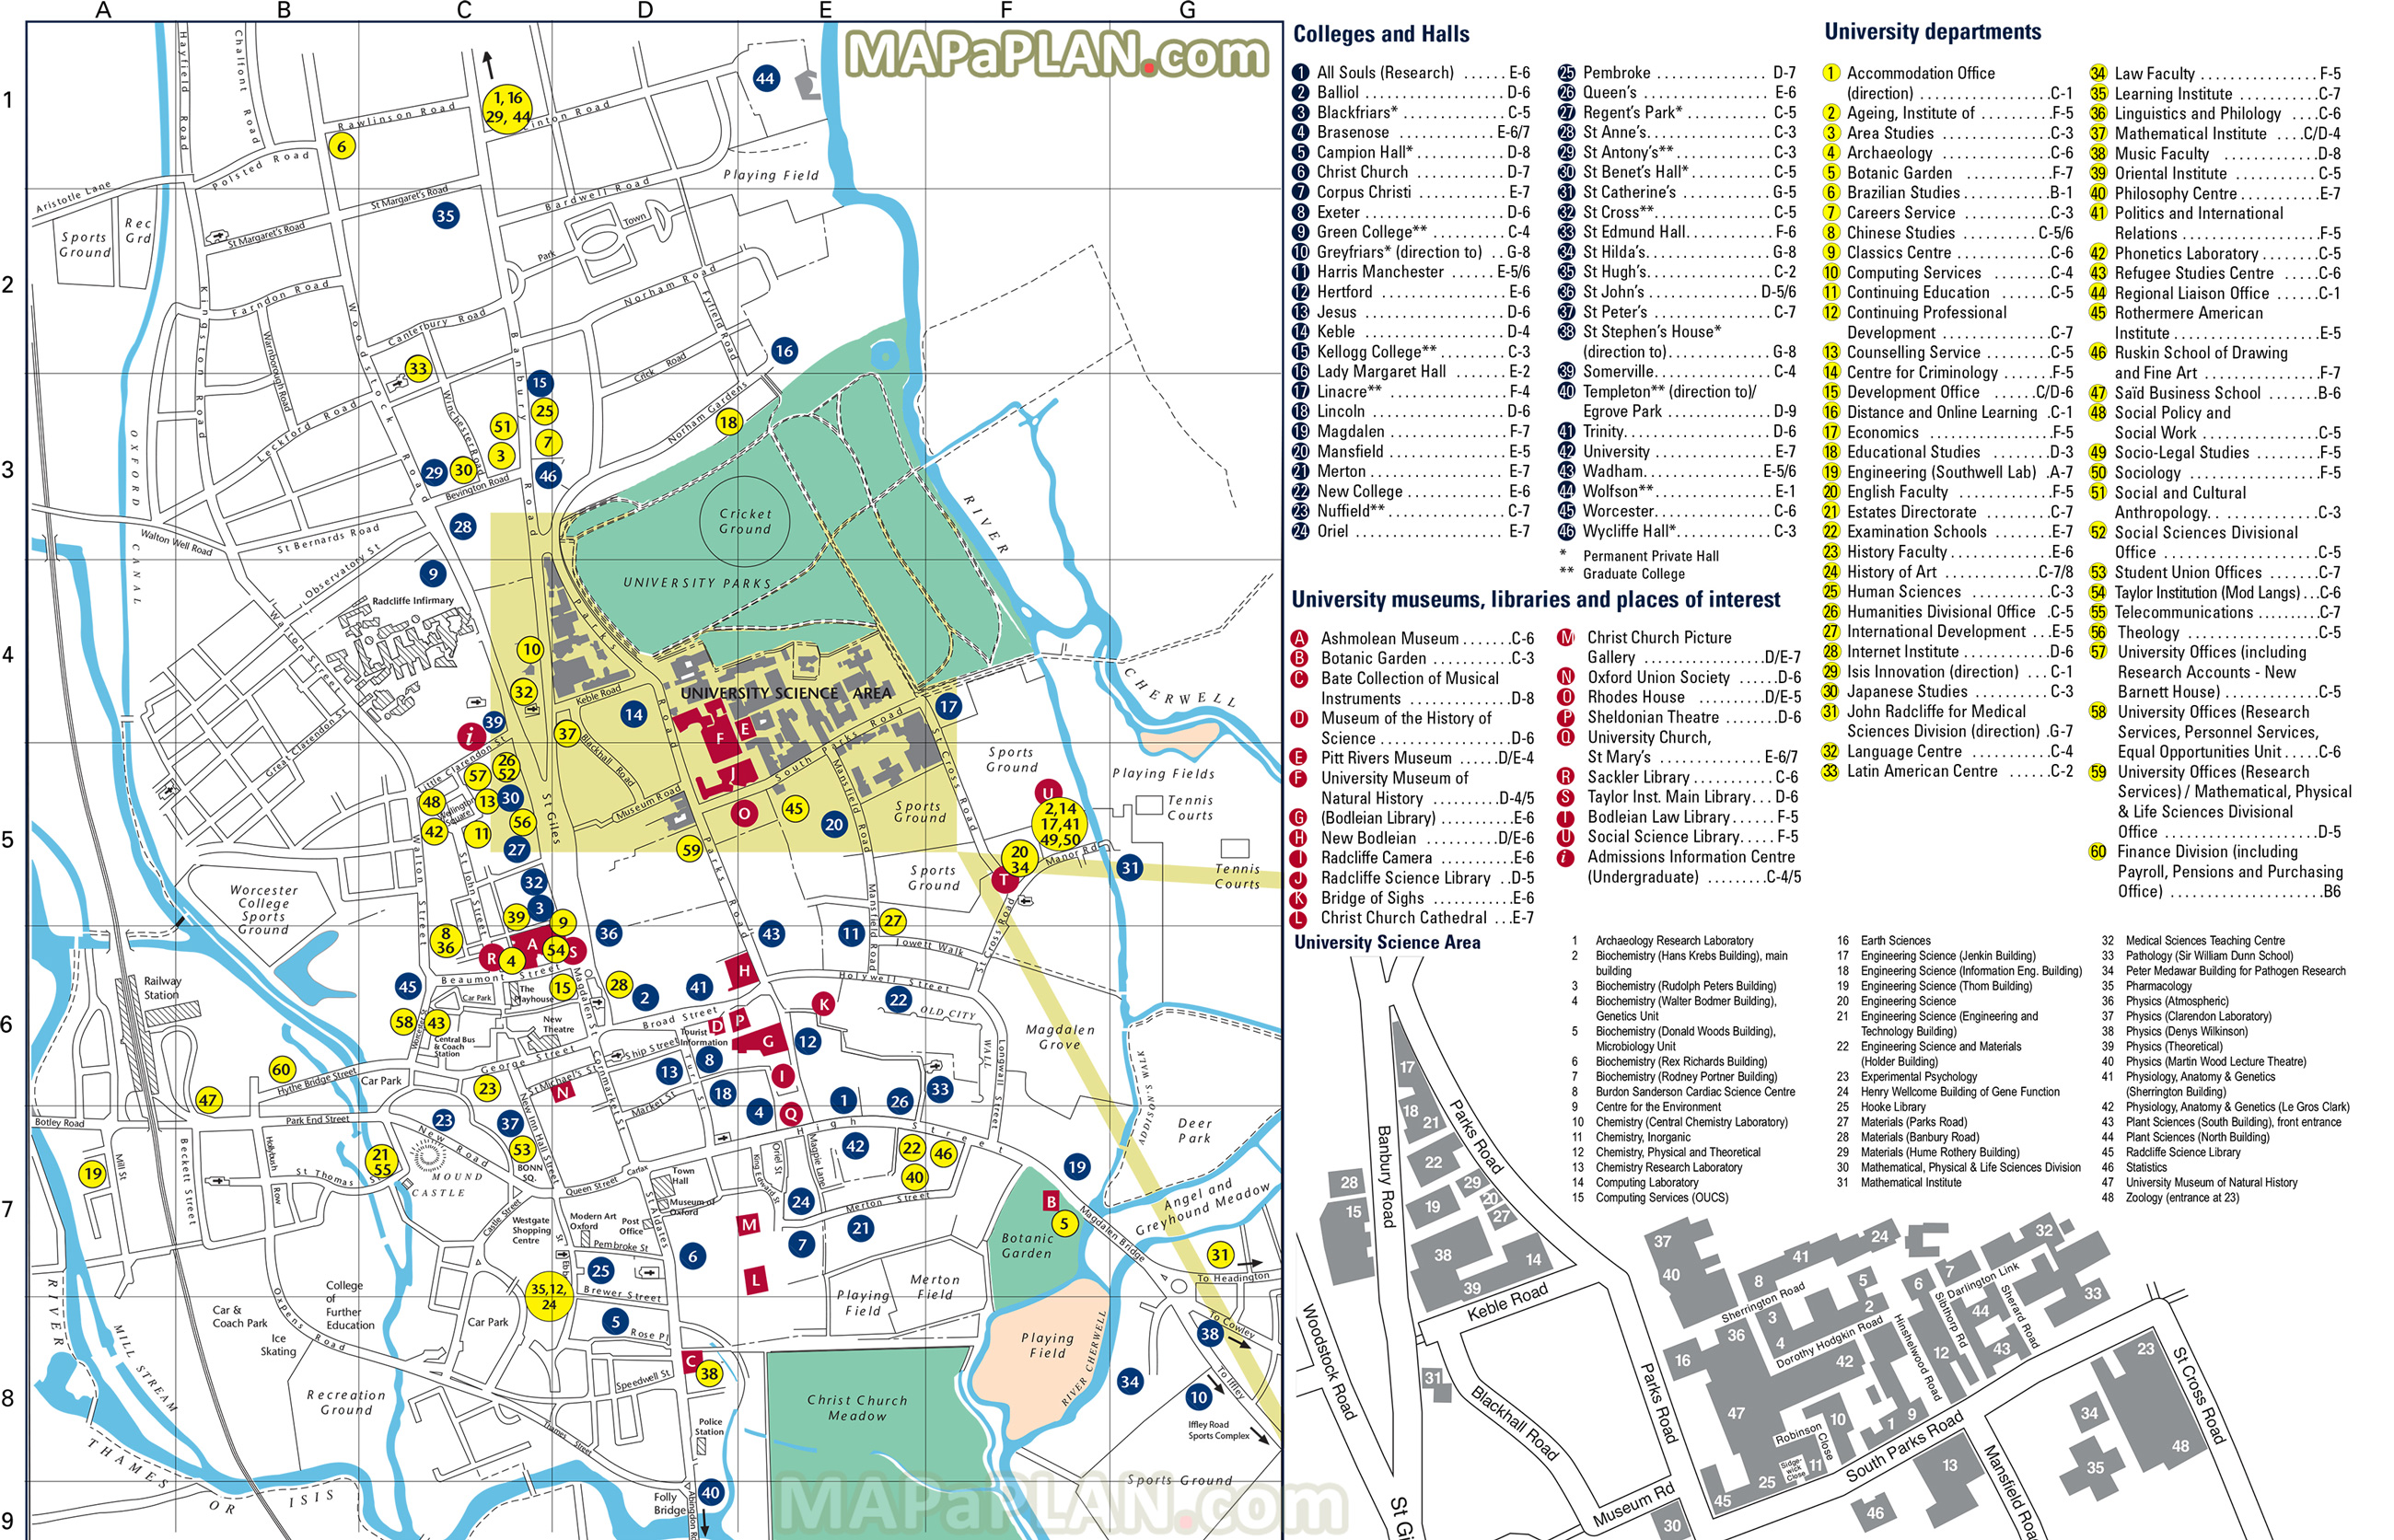 Oxford University Natural History Pitt Rivers Museums campus departments colleges halls libraries parks Oxford top tourist attractions map